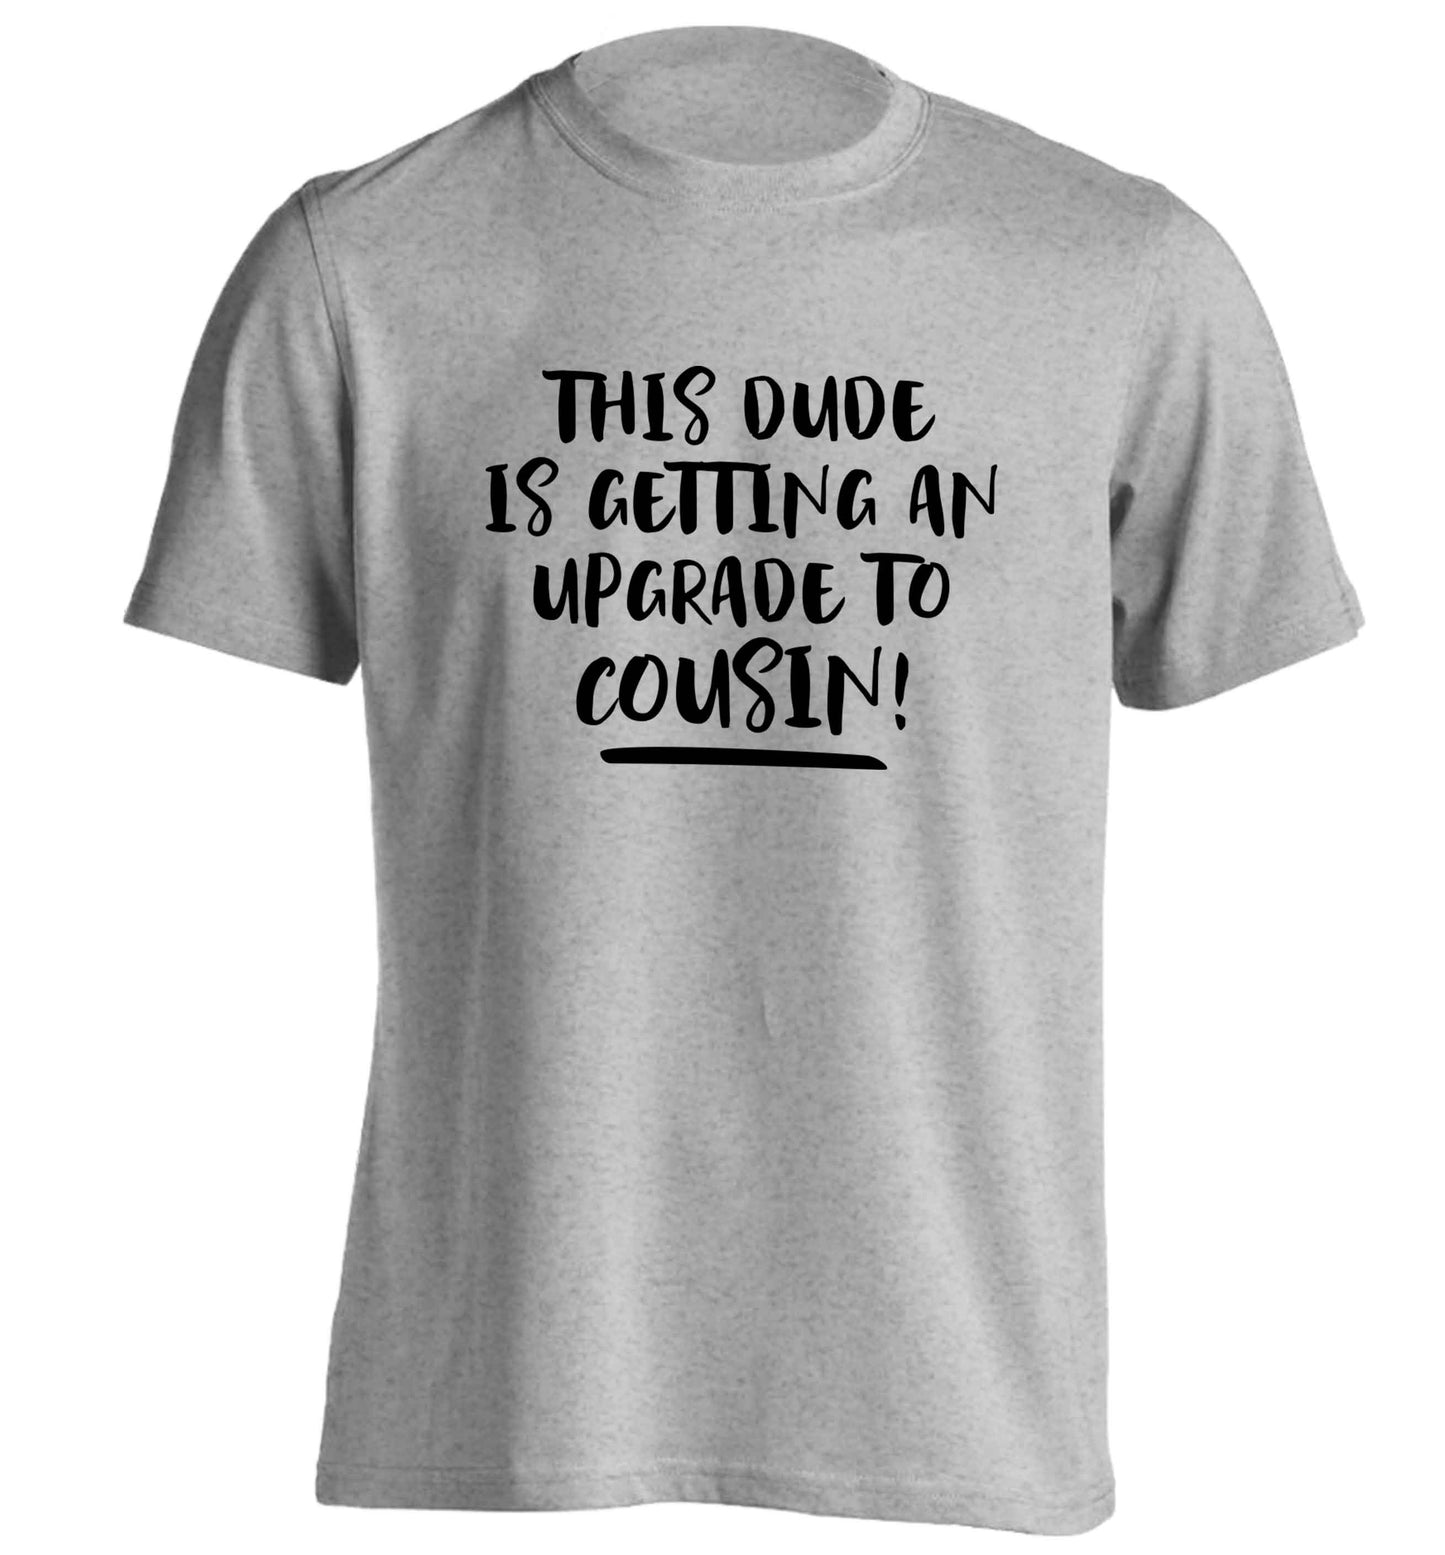 This dude is getting an upgrade to cousin! adults unisex grey Tshirt 2XL